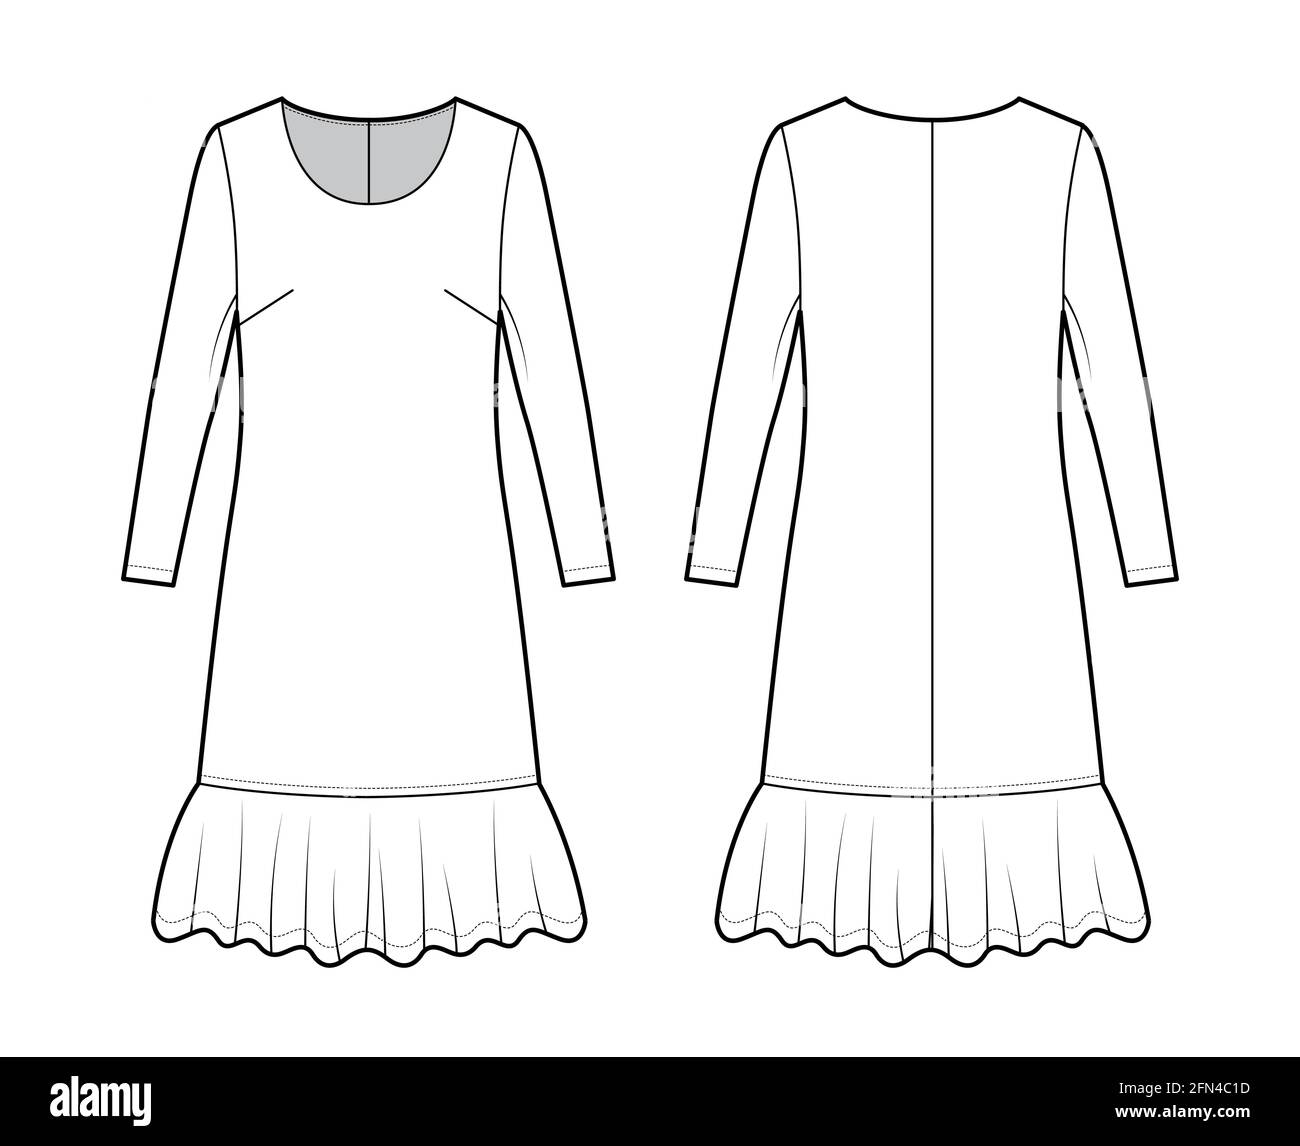 Dress dropped waist technical fashion illustration with long sleeves ...